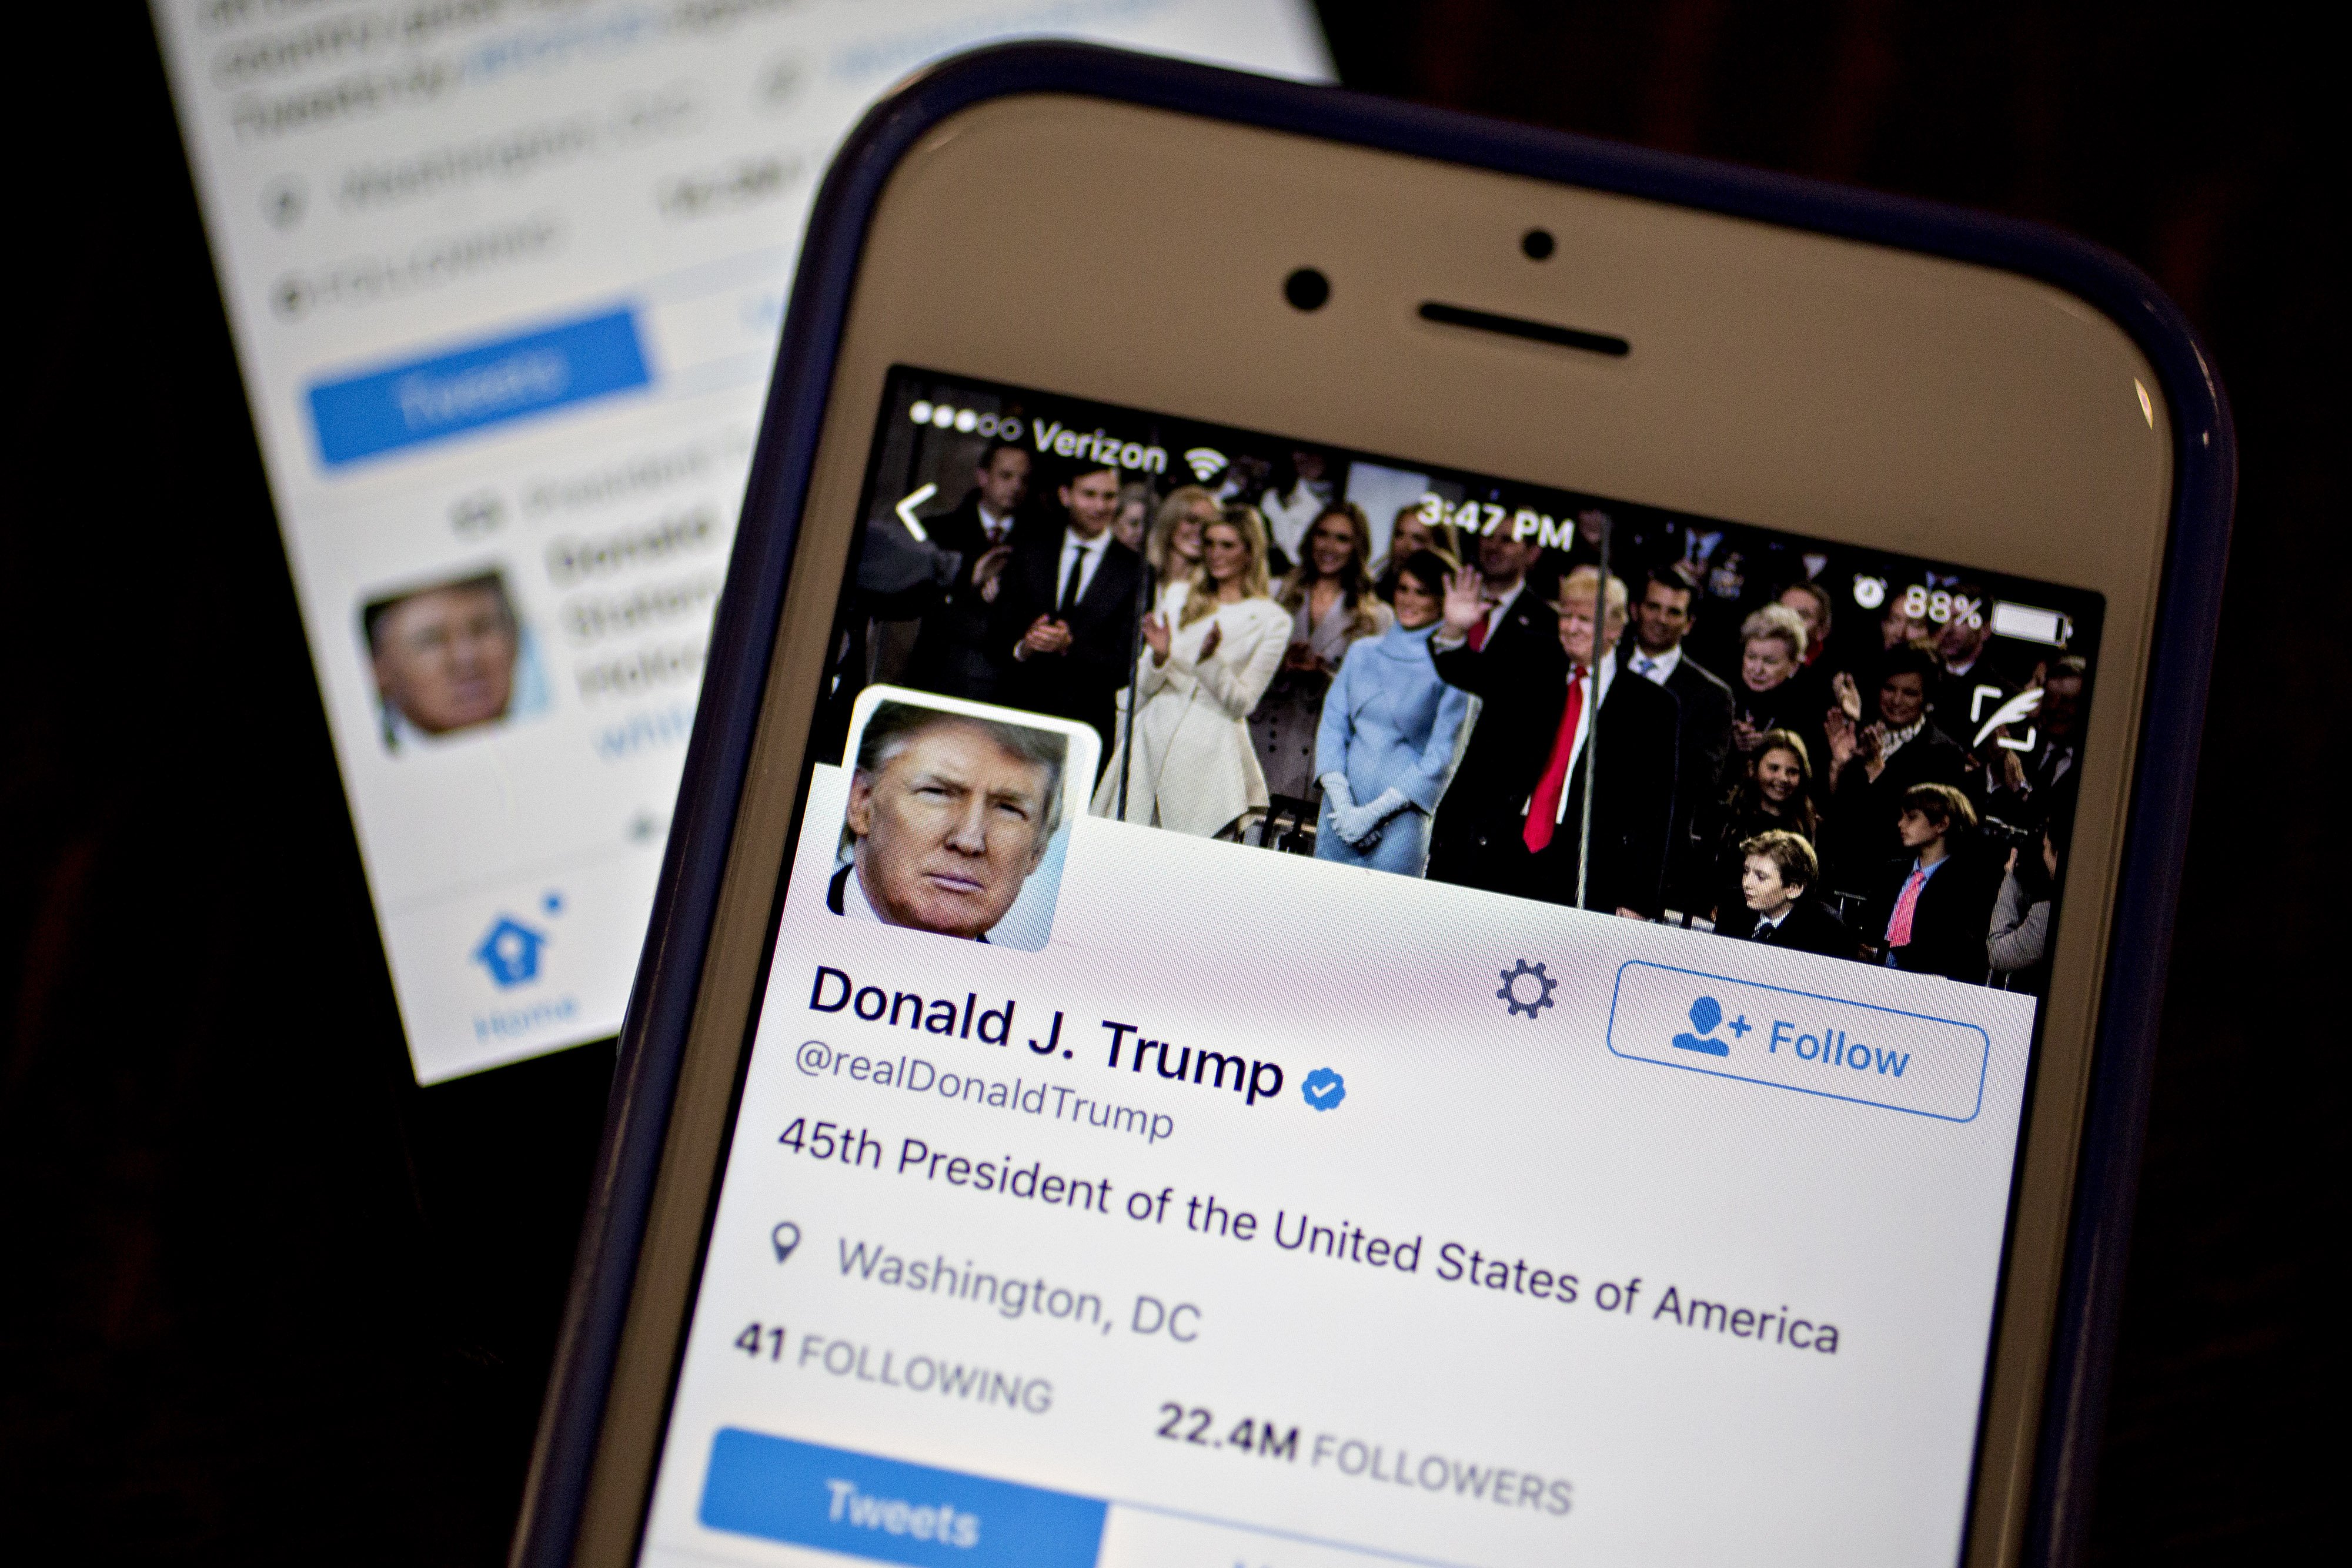 The Twitter Inc. accounts of U.S. President Donald Trump, @POTUS and @realDoanldTrump, are seen on an Apple Inc. iPhone arranged for a photograph in Washington, D.C., U.S., on Friday, Jan. 27, 2017. Mexican President Enrique Pena Nieto canceled a visit to the White House planned for next week after Trump on Thursday reinforced his demand, via Twitter, that Mexico pay for a barrier along the U.S. southern border to stem illegal immigration. Photographer: Andrew Harrer/Bloomberg